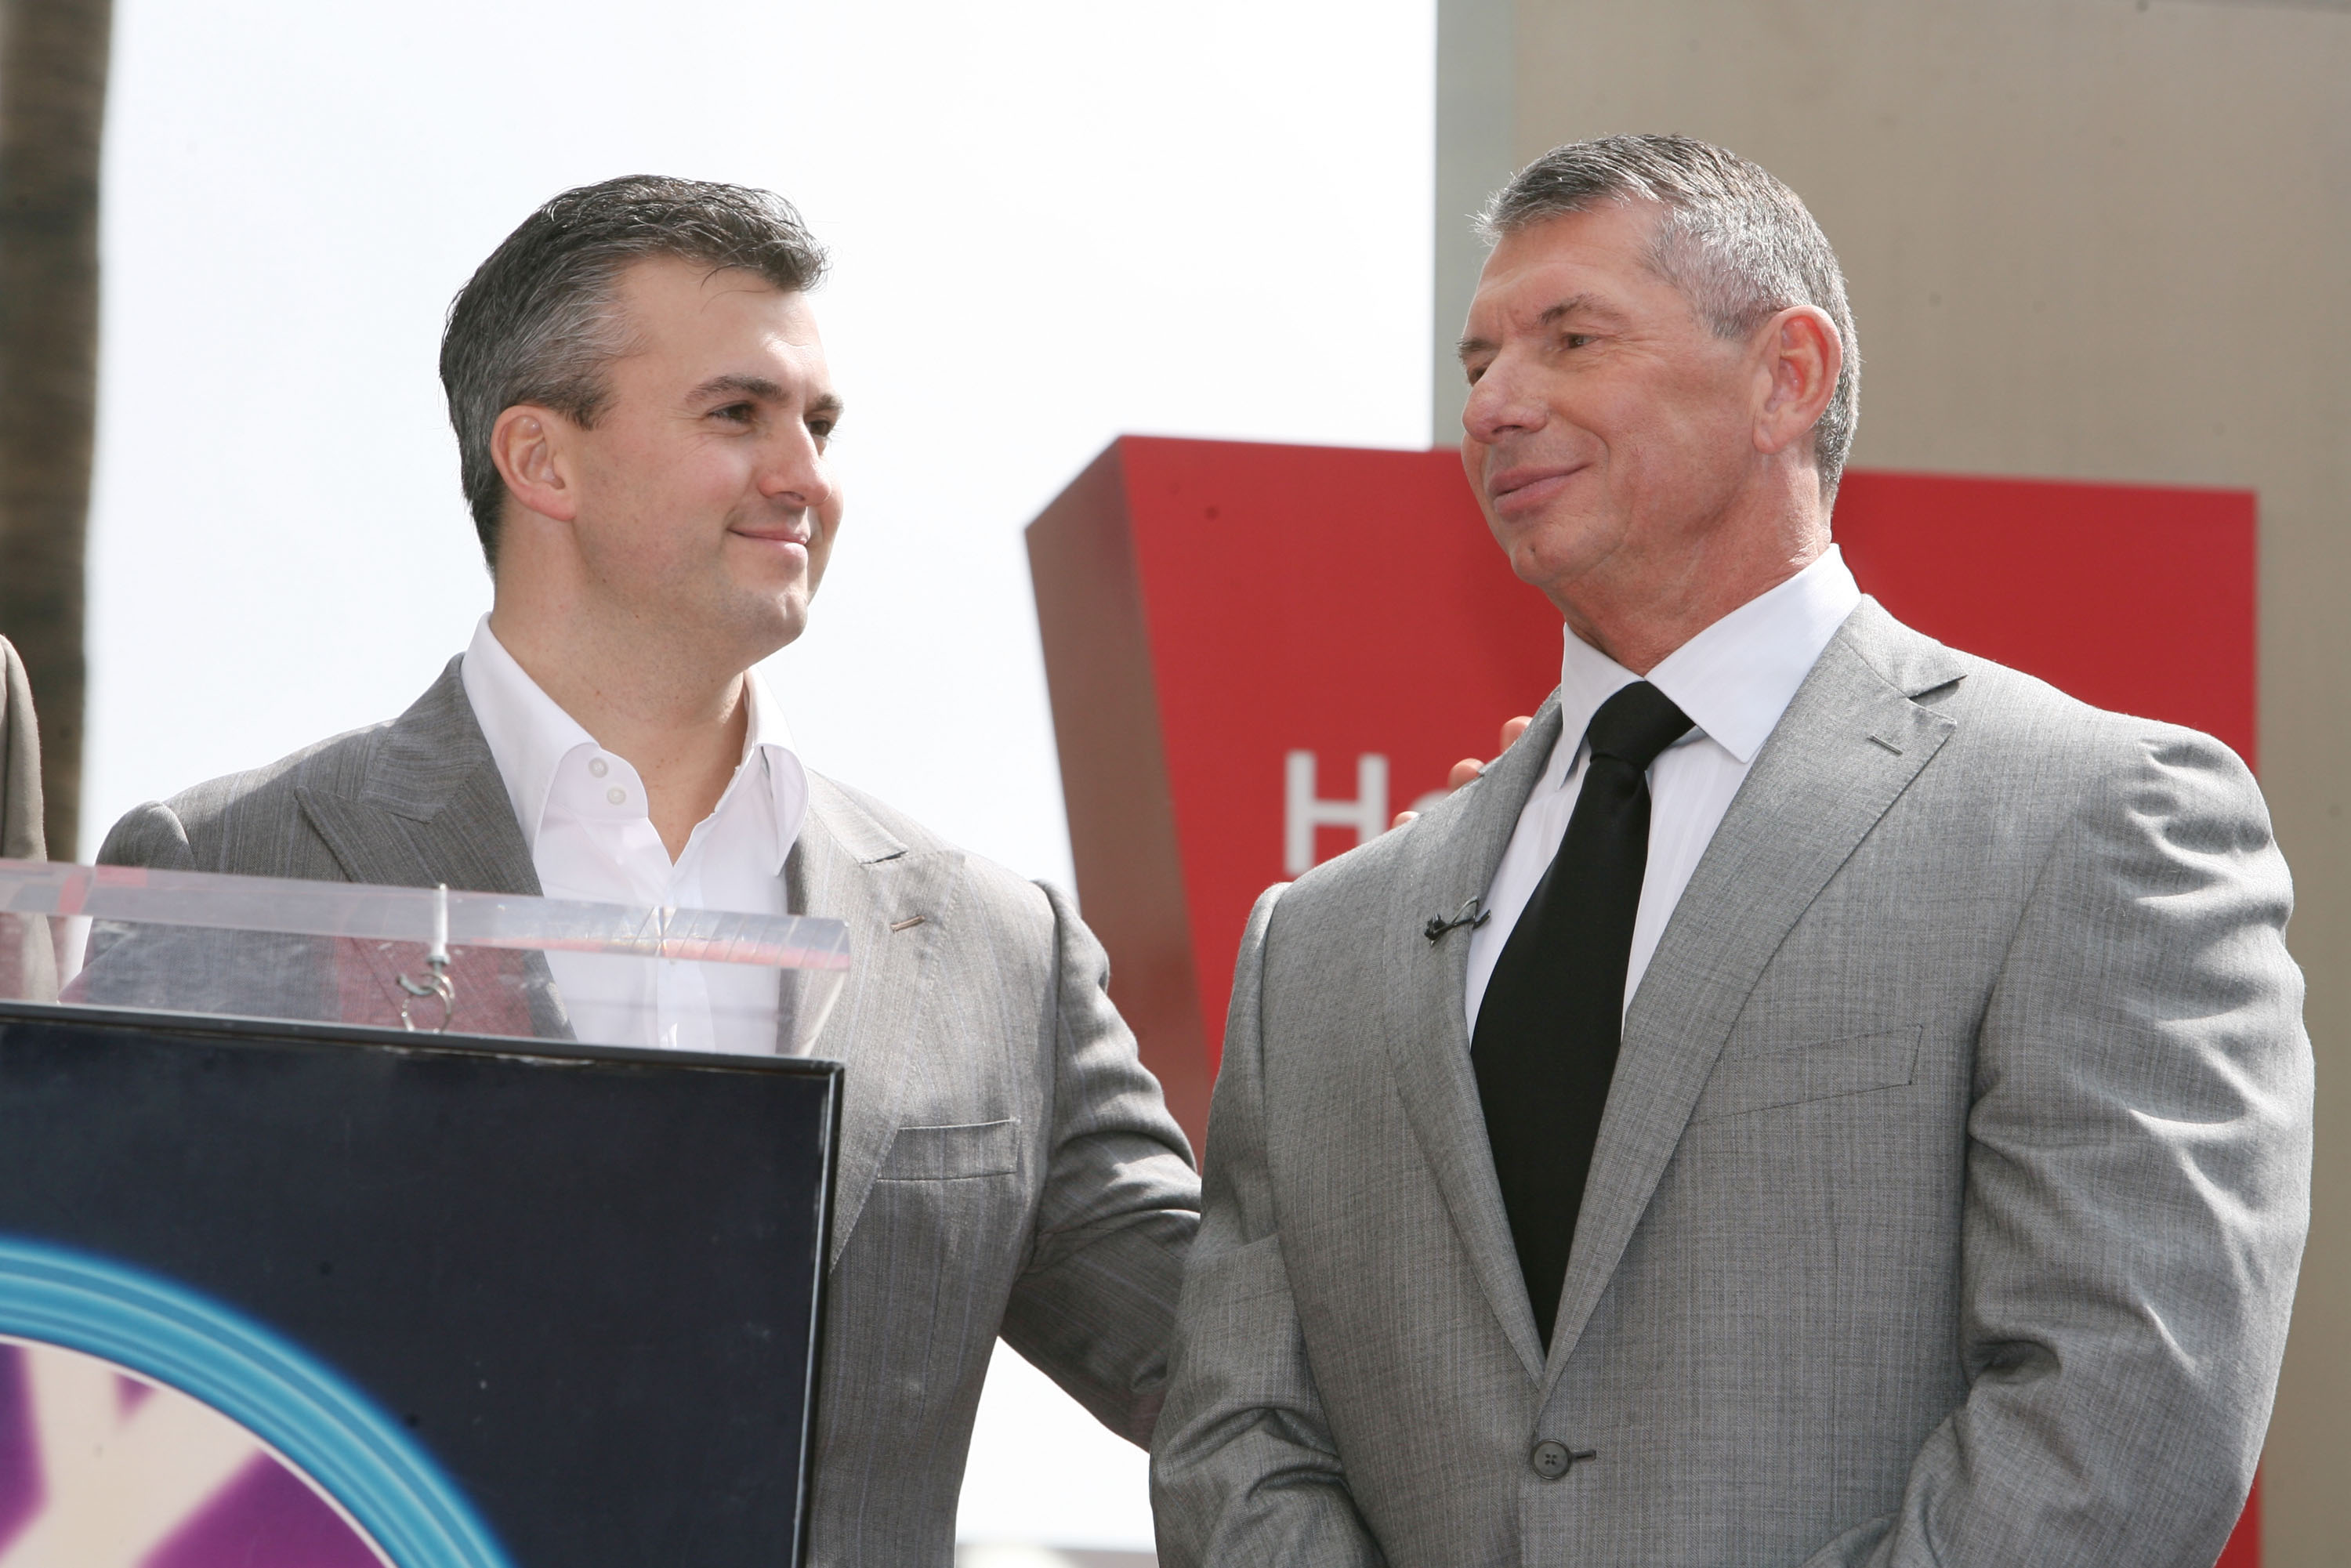 VIDEO: Off-Air Footage of Shane McMahon Thanking the Fans at WWE Raw Tonight